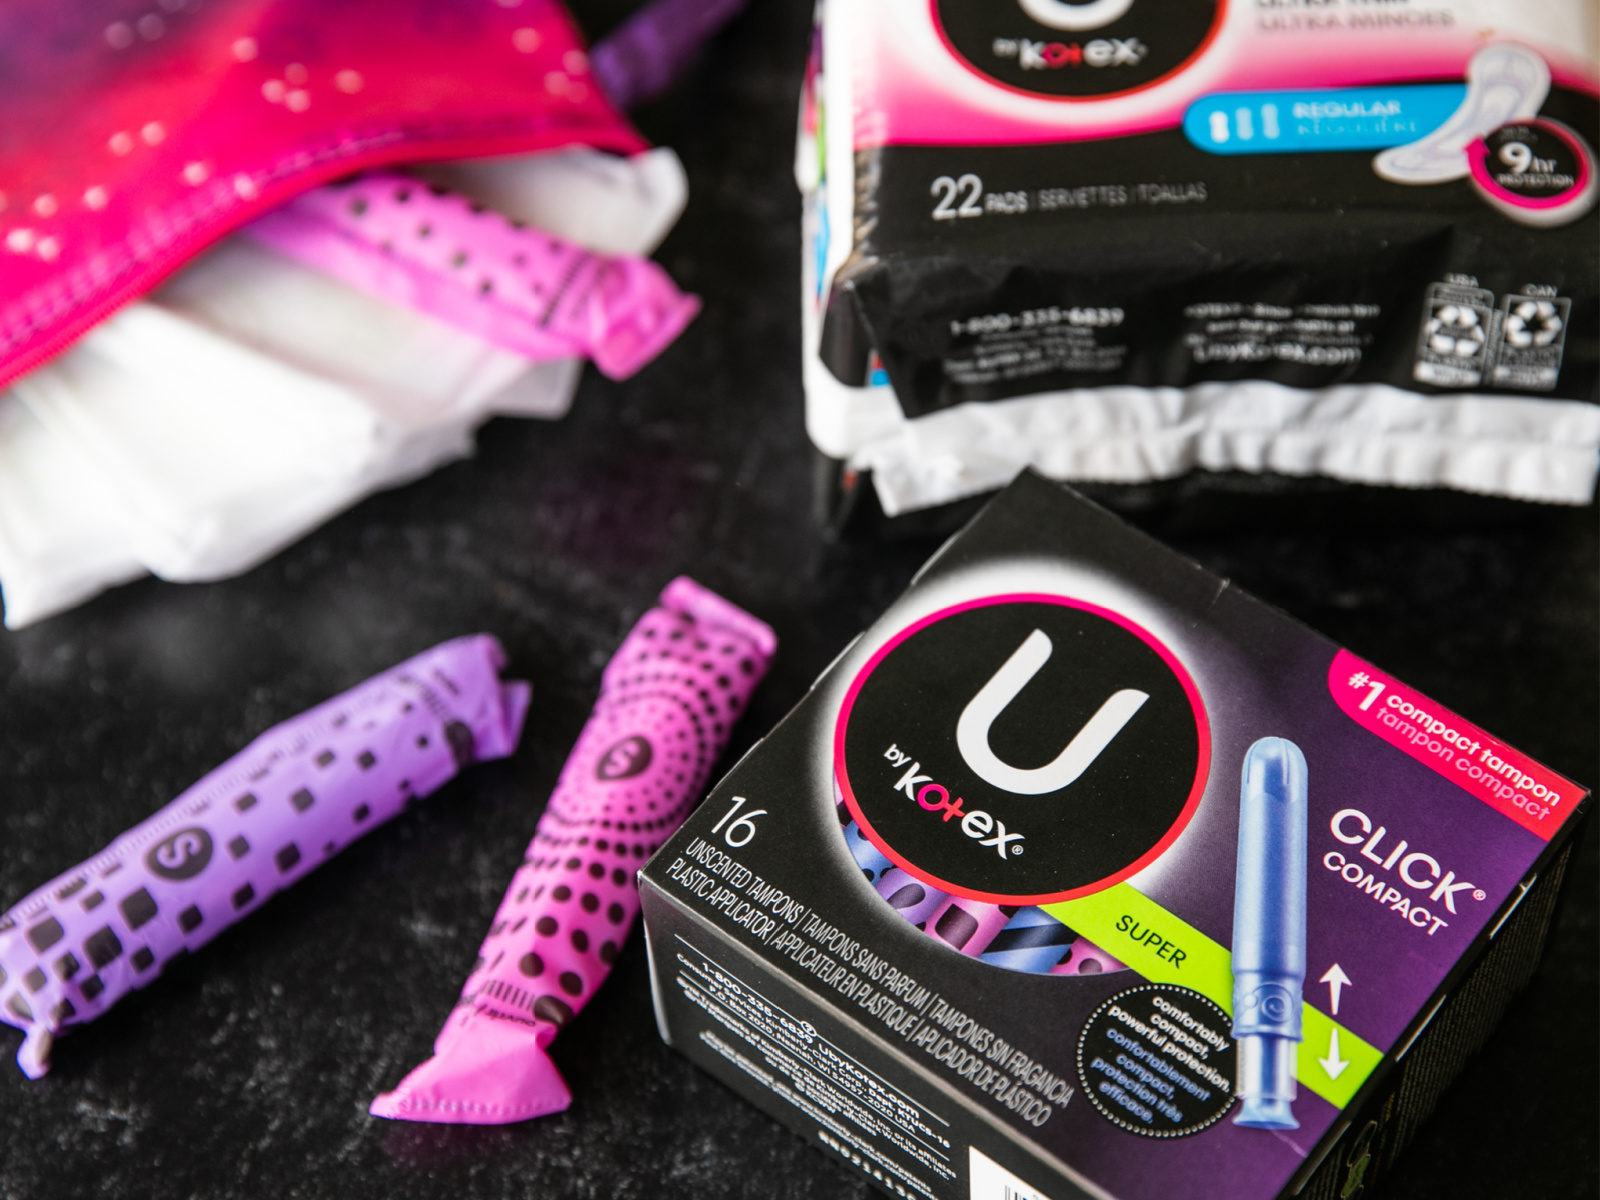 Huge Savings On U By Kotex Products Available This Week At Publix! on I Heart Publix 1